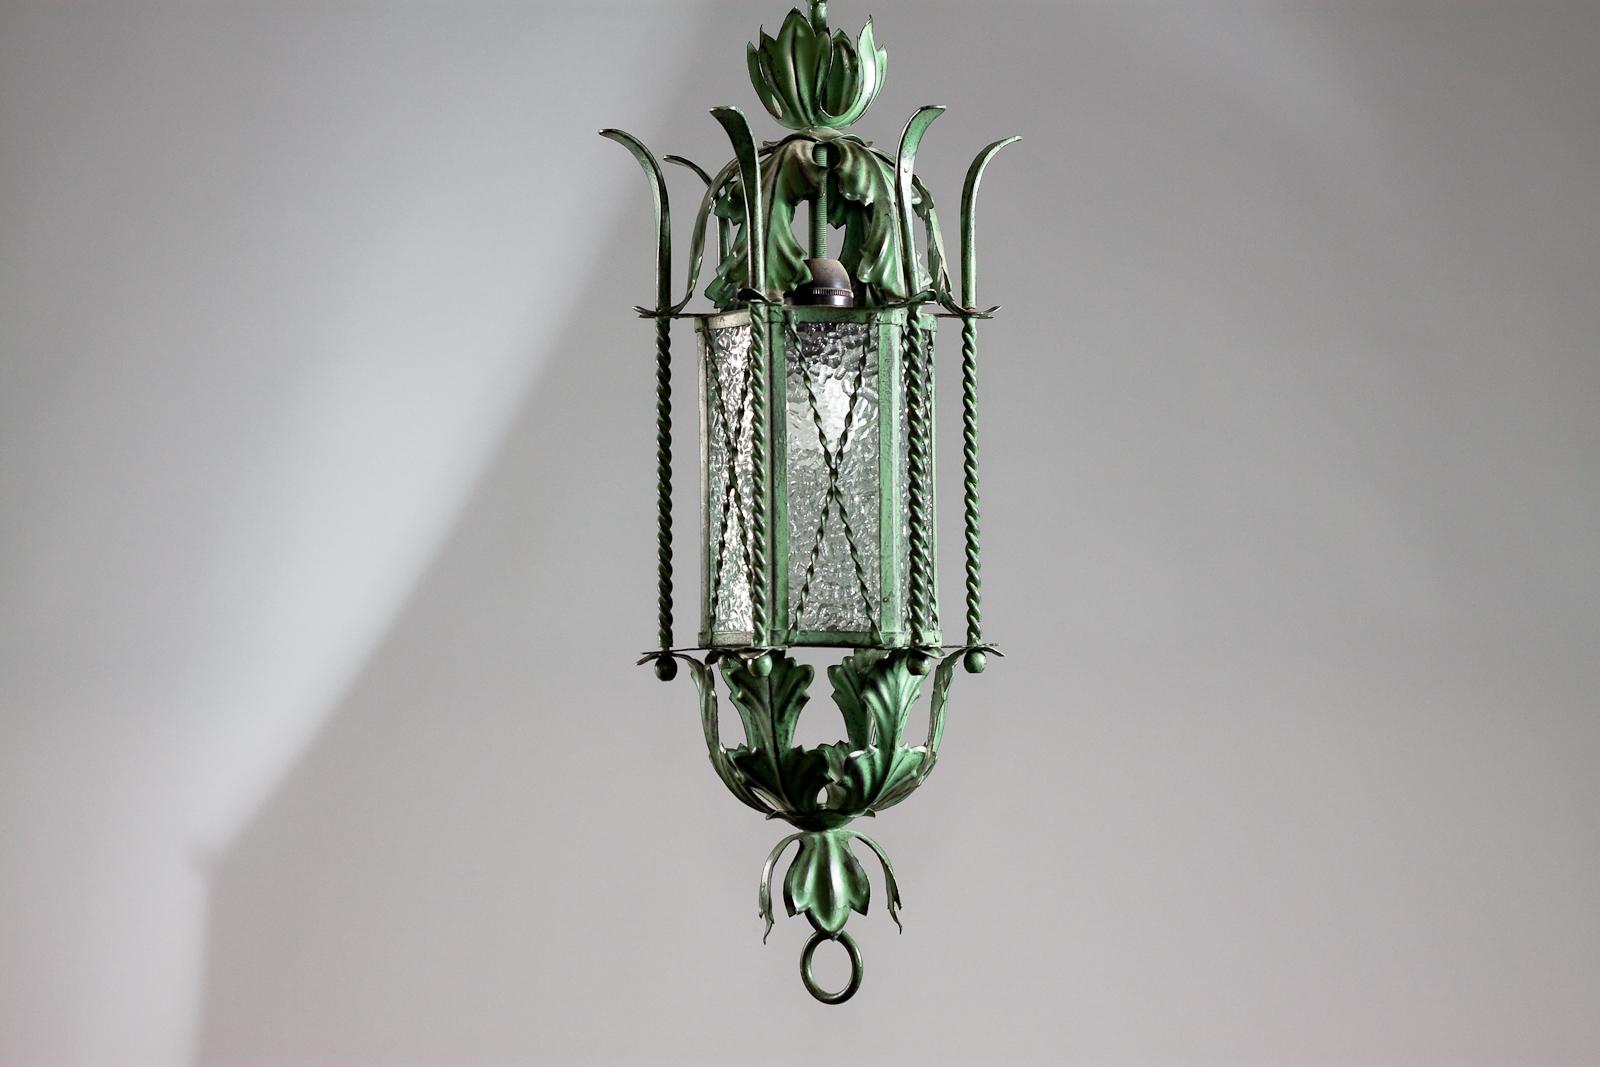 This 1930's Finnish wrought iron lantern light is a rare and striking piece, perfect for lovers of vintage lighting. The patinated decorative detailing gives it an old-world charm, lending a touch of elegance to any space. This piece is attributed